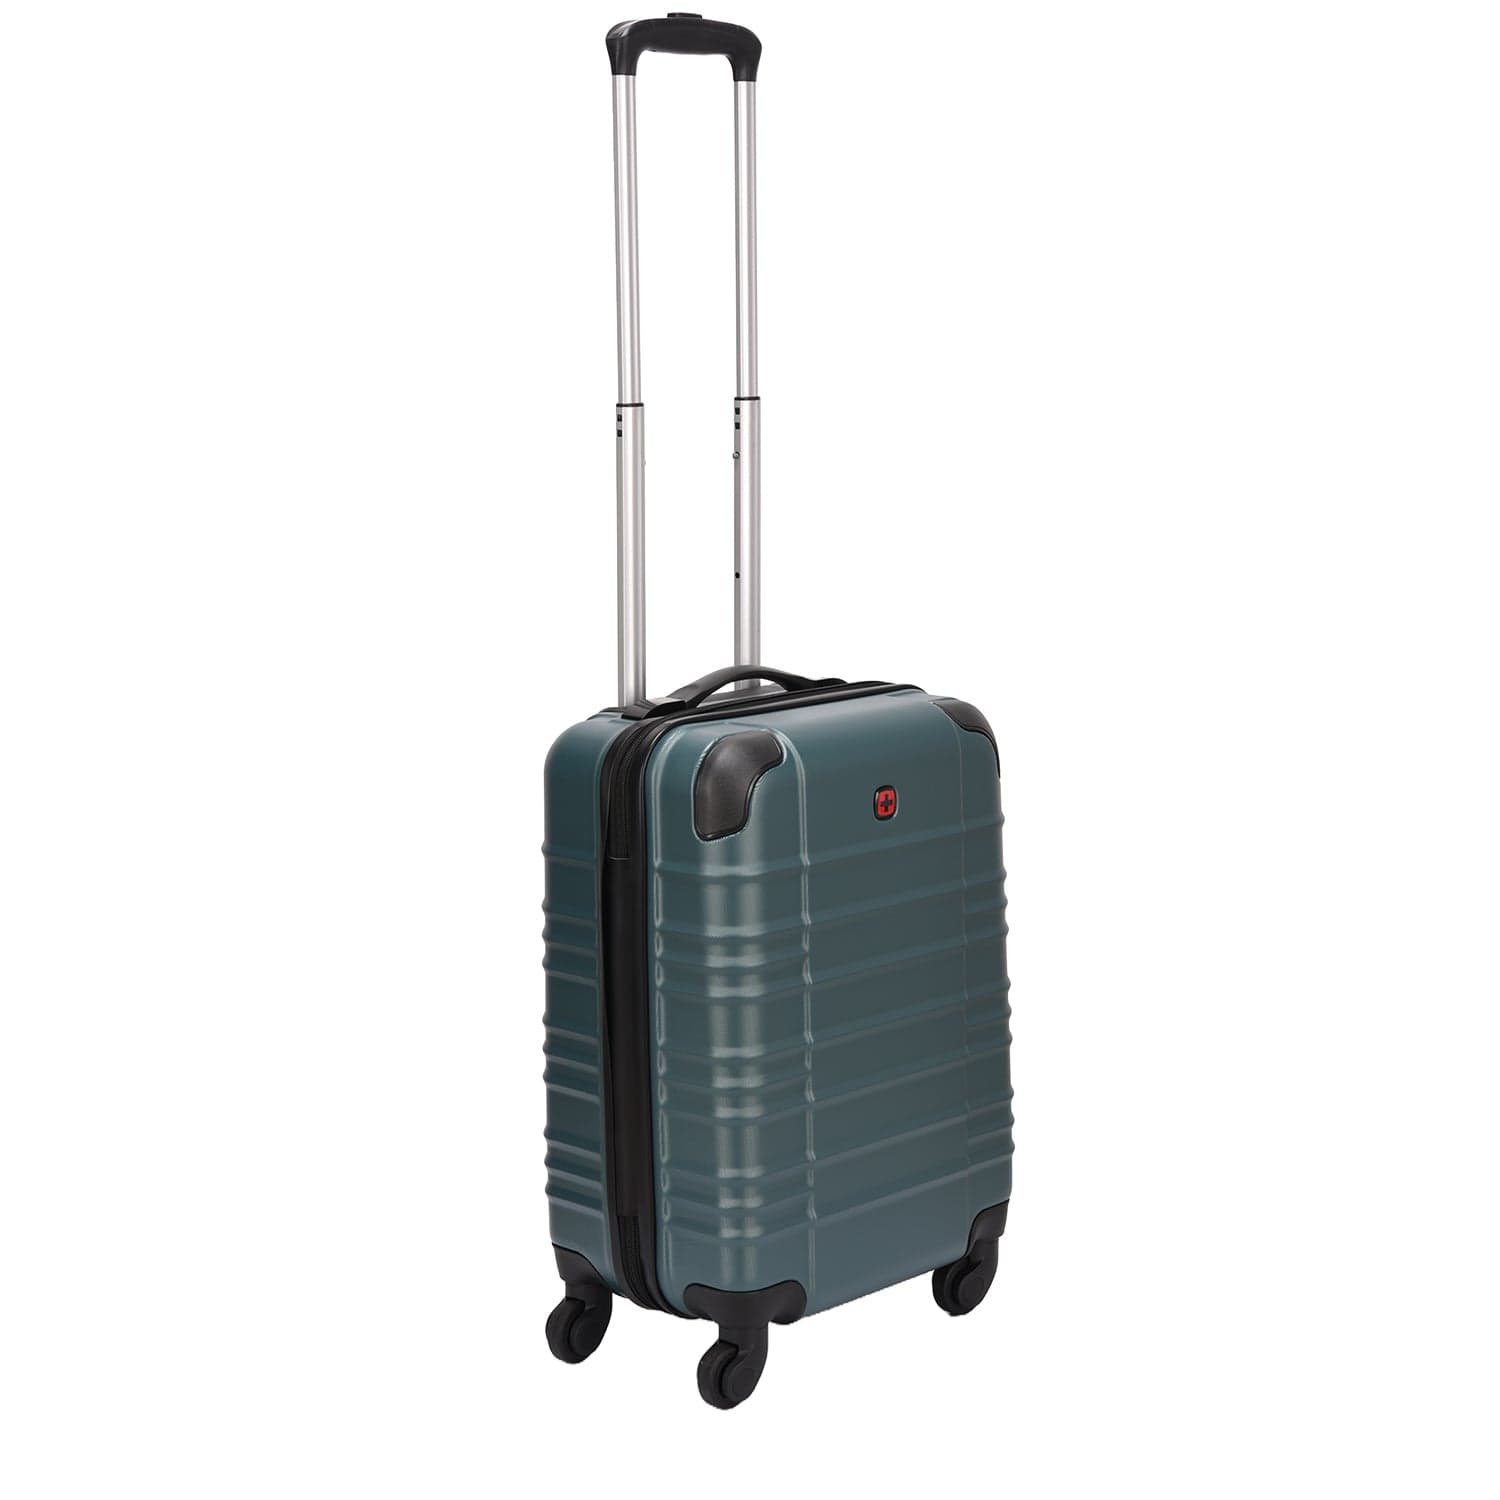 Wenger Amplar 3 Piece 53+65+75cm Hardside Non-Expandable Check-In Luggage Trolley Set Deep Lake - 653151